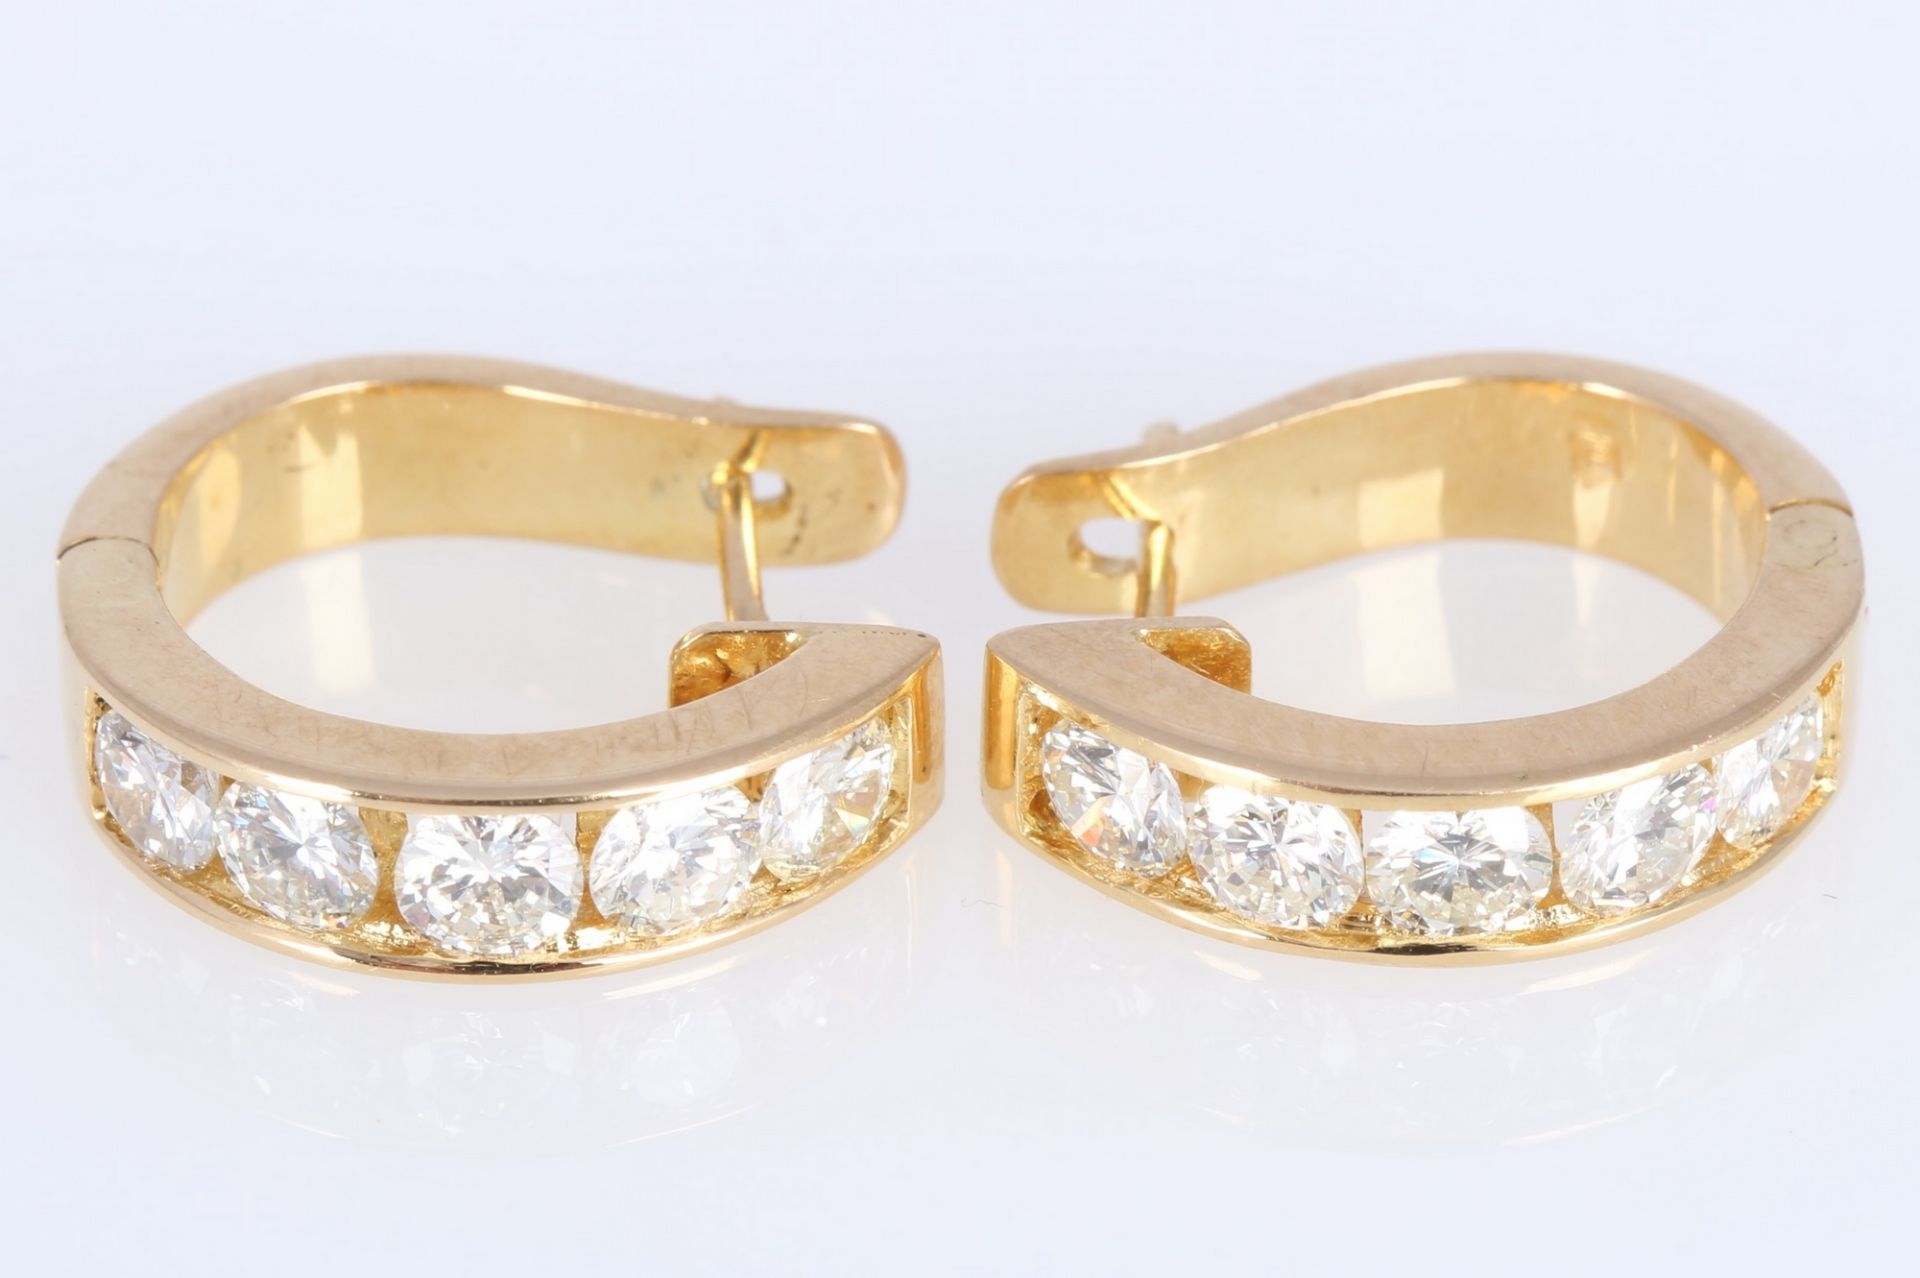 750 Gold Brillant Ohrringe 1,2ct, 18K gold earrings with diamonds,